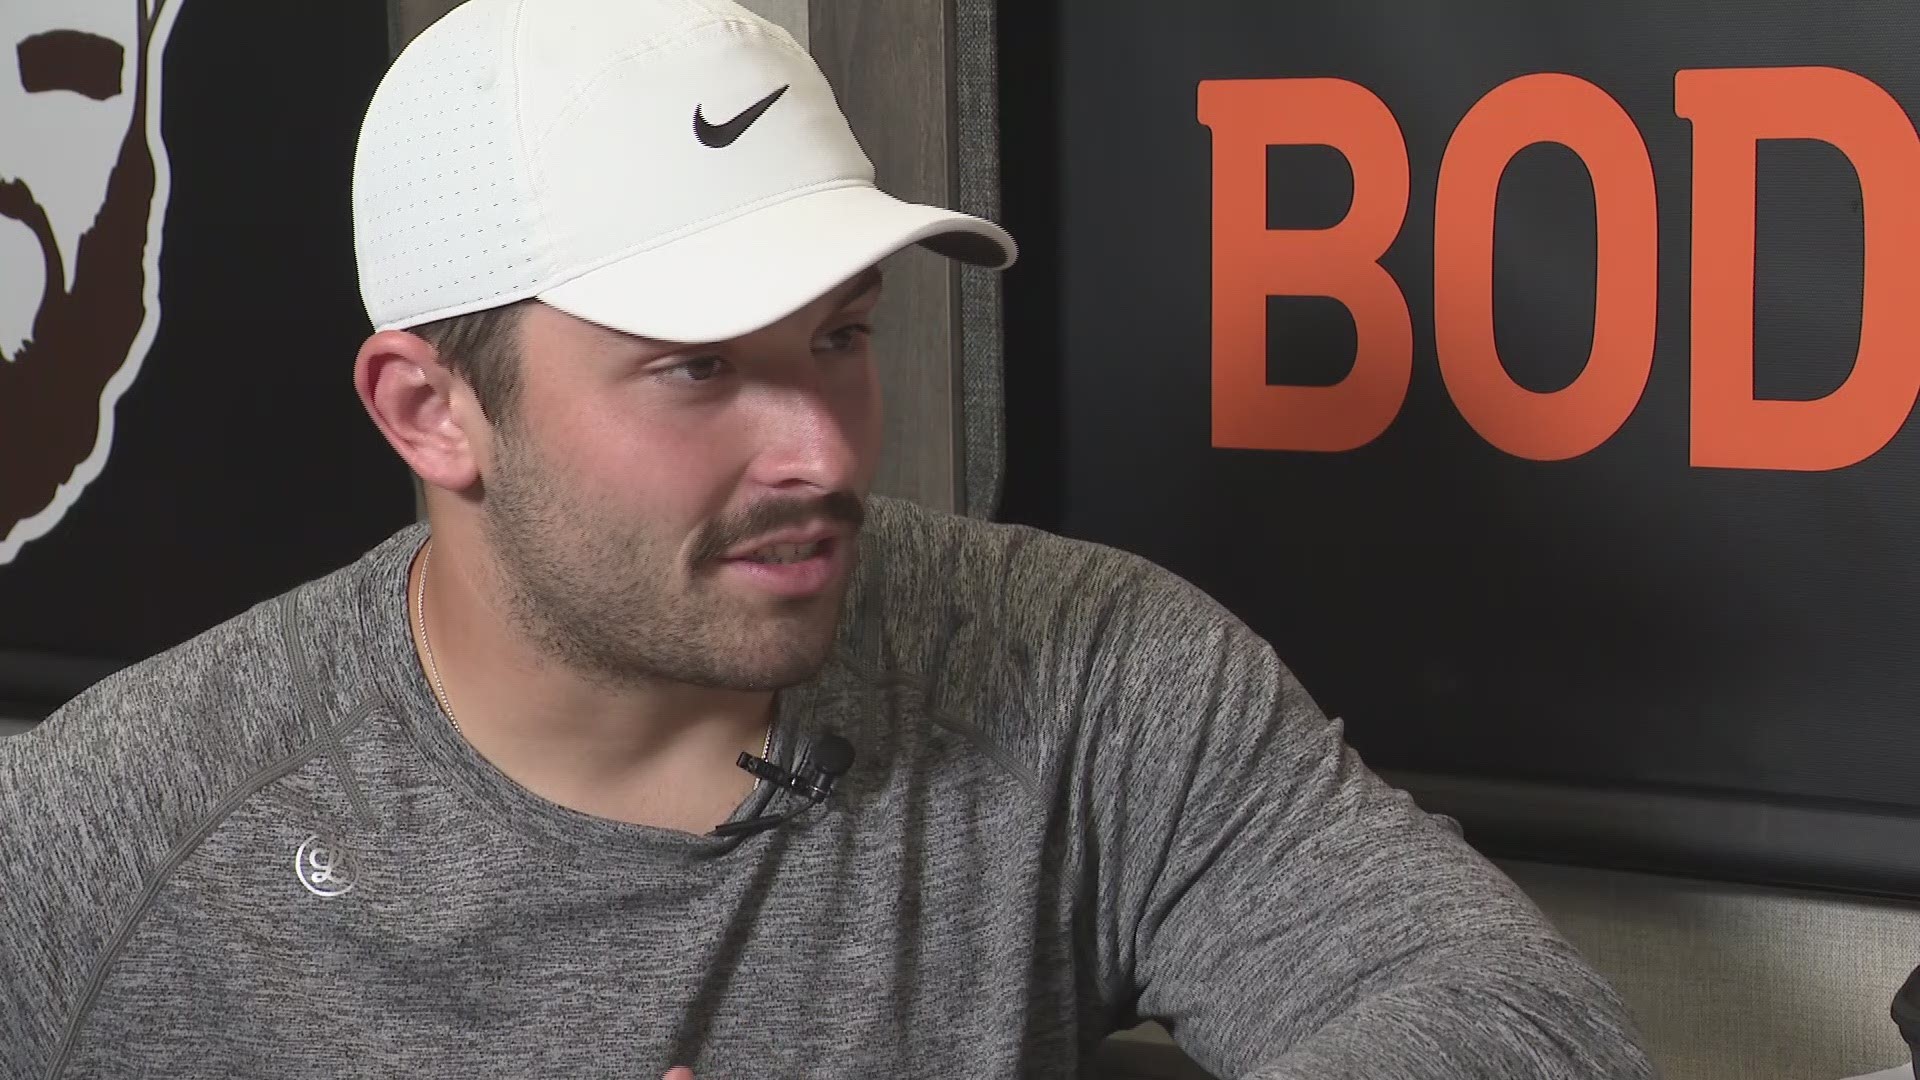 Cleveland Browns QB discussed his recent wedding and marriage to Emily Wilkinson during an exclusive interview with WKYC's Jim Donovan. Baker said he enjoyed his time away from football and his honeymoon in Hawaii.